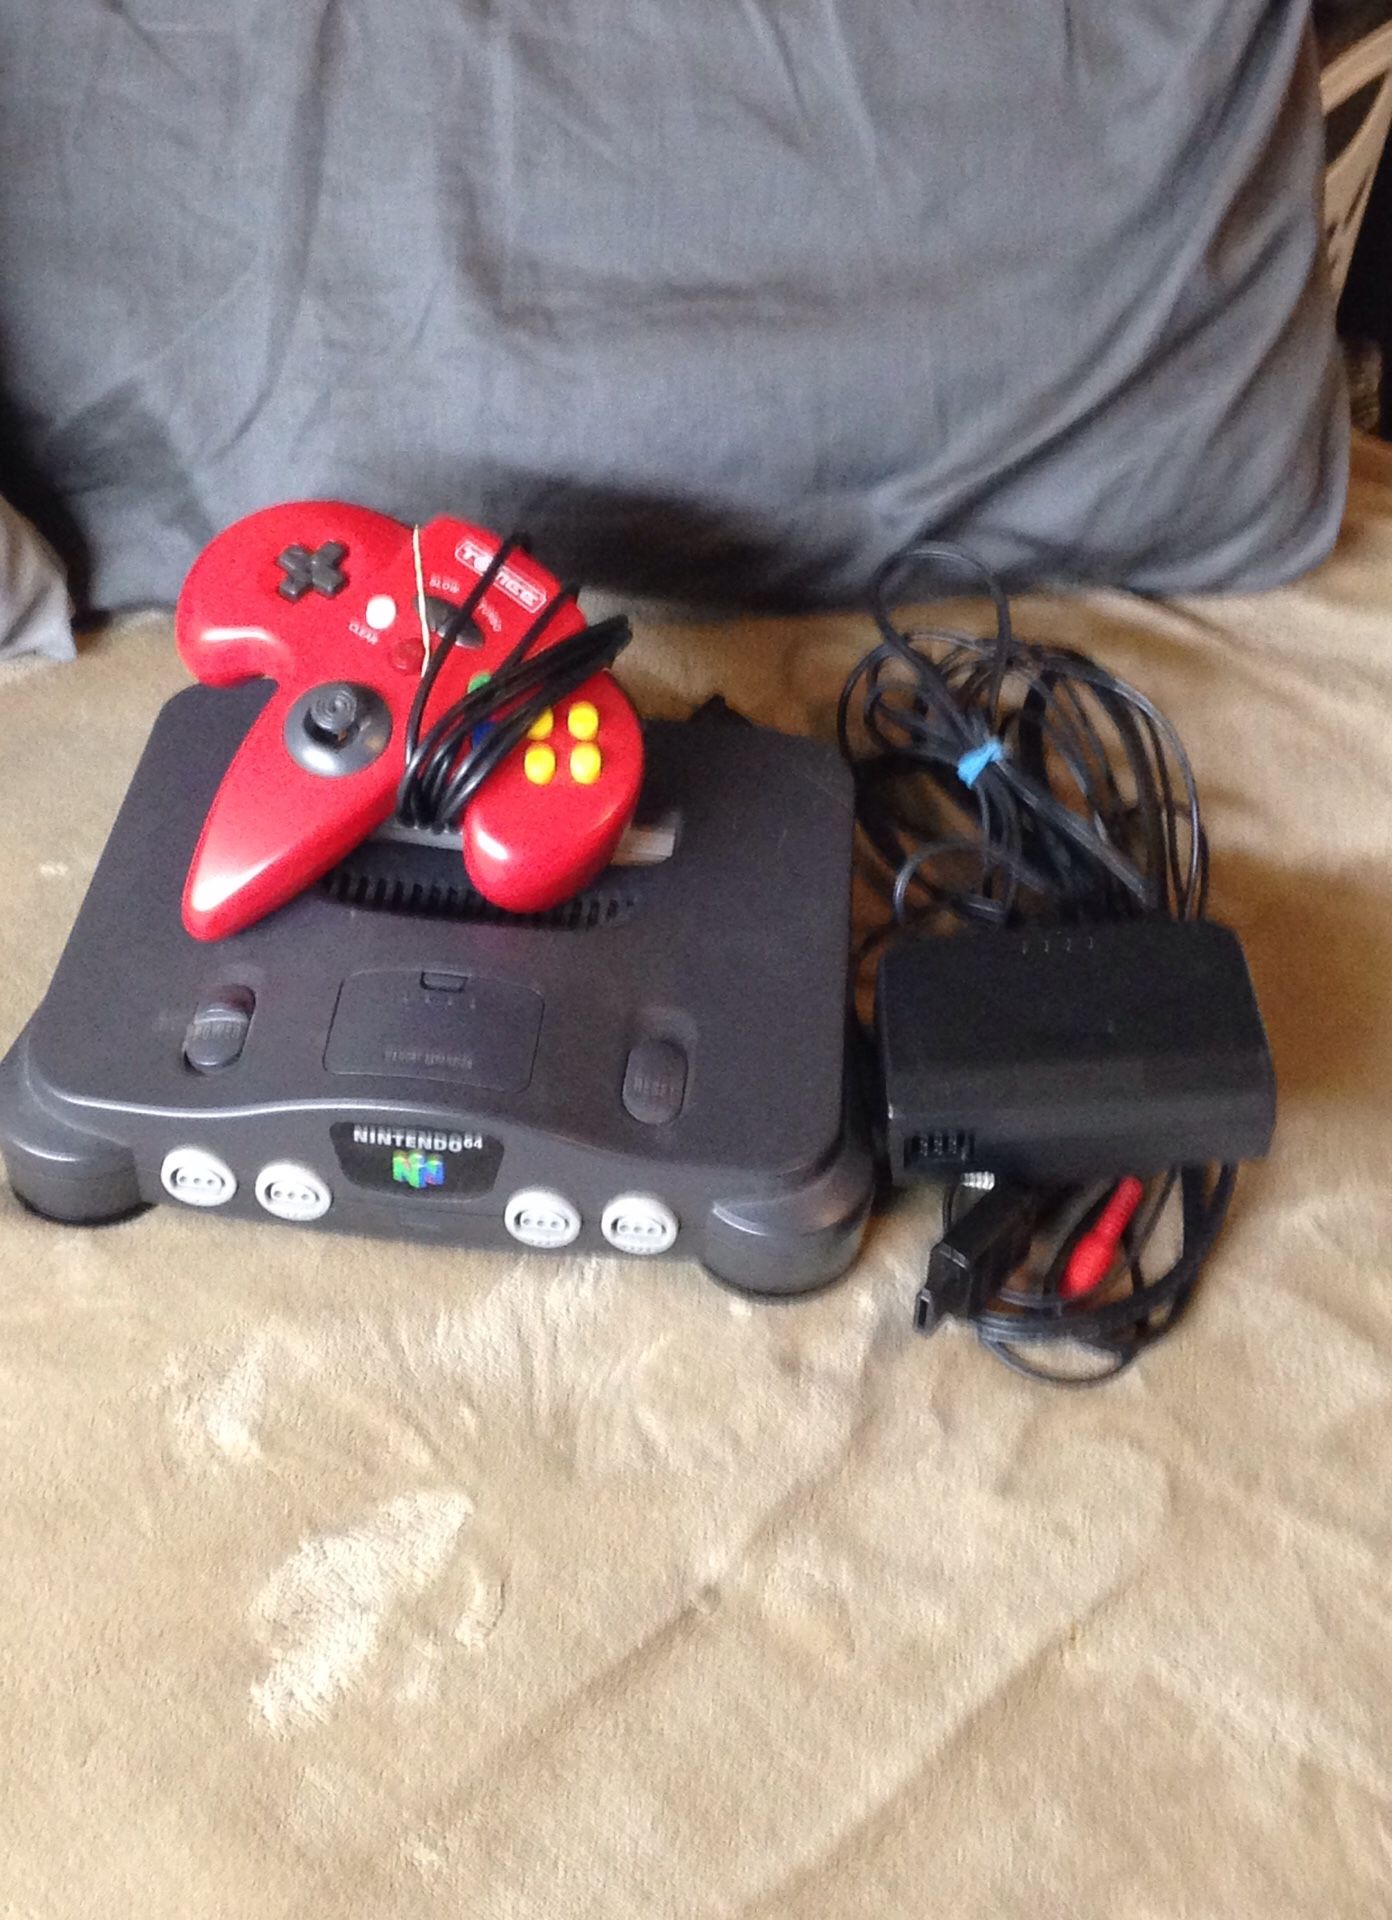 Nintendo N64 with controller